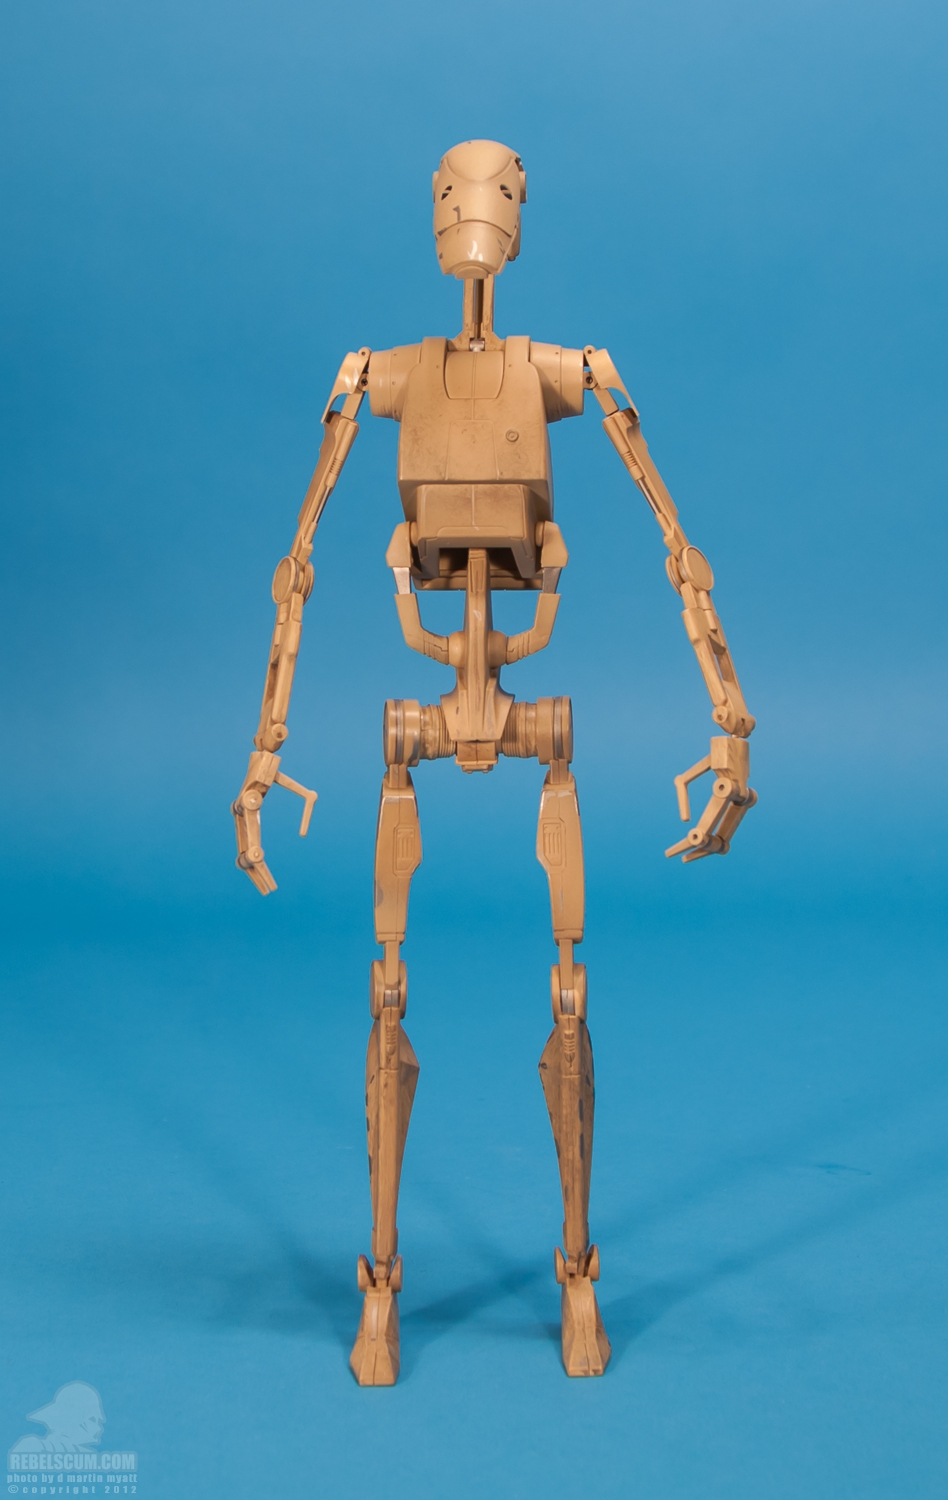 STAP_Battle_Droid_Star_Wars_Sideshow_Collectibles-05.jpg